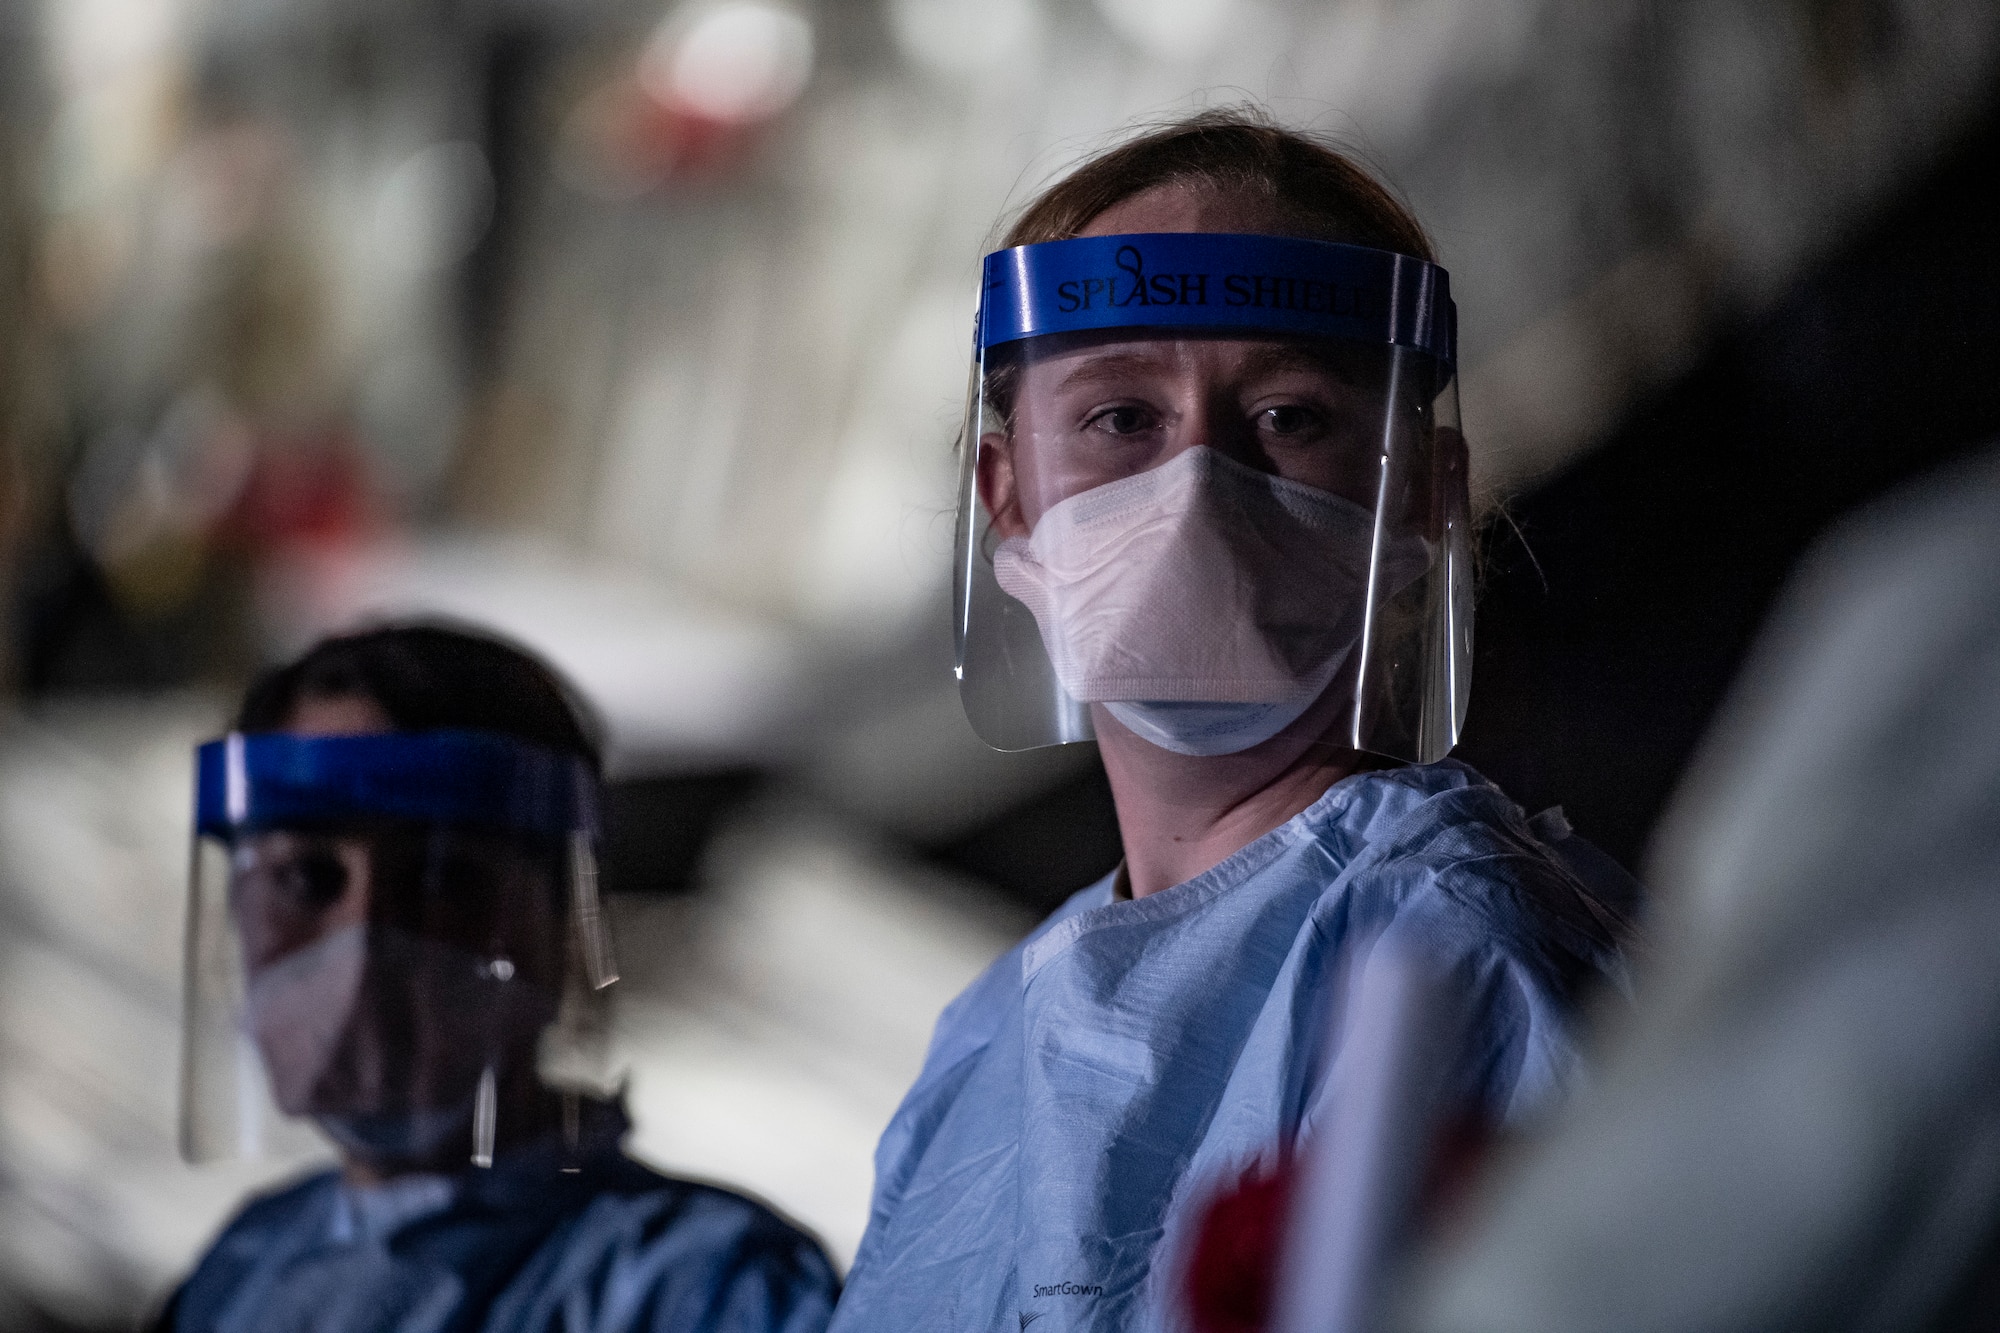 A U.S. Air Force medical Airman awaits patient documentation      following the first-ever operational use of the Transport Isolation System at Ramstein Air Base, Germany, April 10, 2020. The TIS is an infectious disease containment unit designed to minimize contamination risk to aircrew and medical attendants, while allowing in-flight medical care for patients afflicted by a disease--in this case, COVID-19. (U.S. Air Force photo by Staff Sgt. Devin Nothstine)